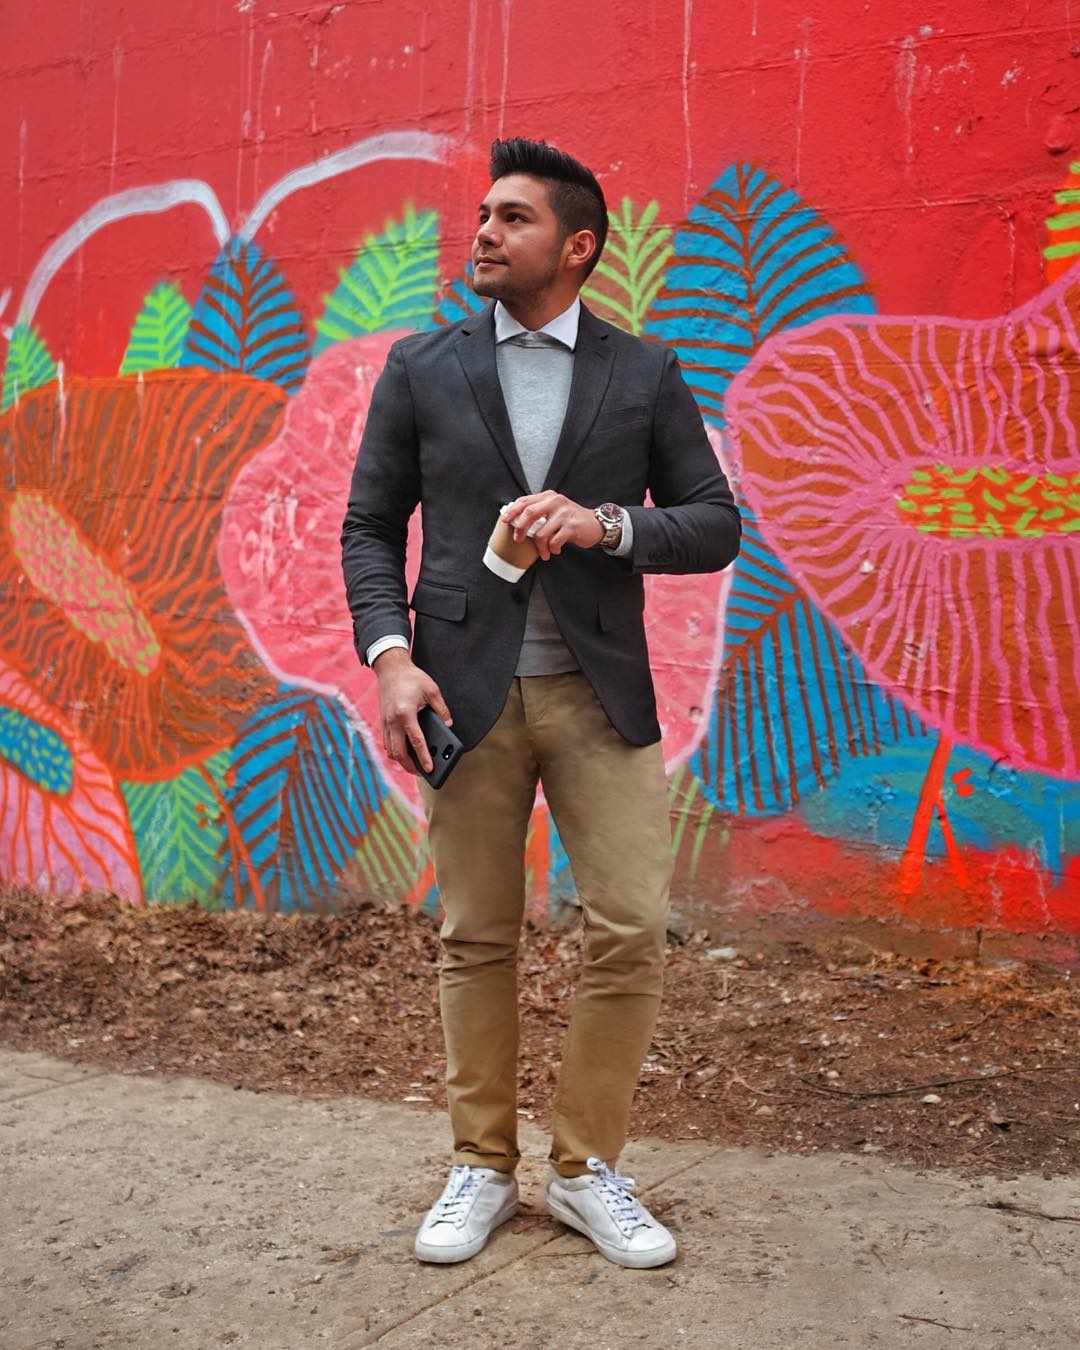 Chinos: How to Wear Them Well - khaki chino - khaki chinos - casual chinos - how to wear chinos - smart casual chinos - casual chinos - how to style chinos - how to wear chinos - colorful chinos - dandy in the bronx - smart casual chinos - untucked shirt and chinos - united by khaki outfit 